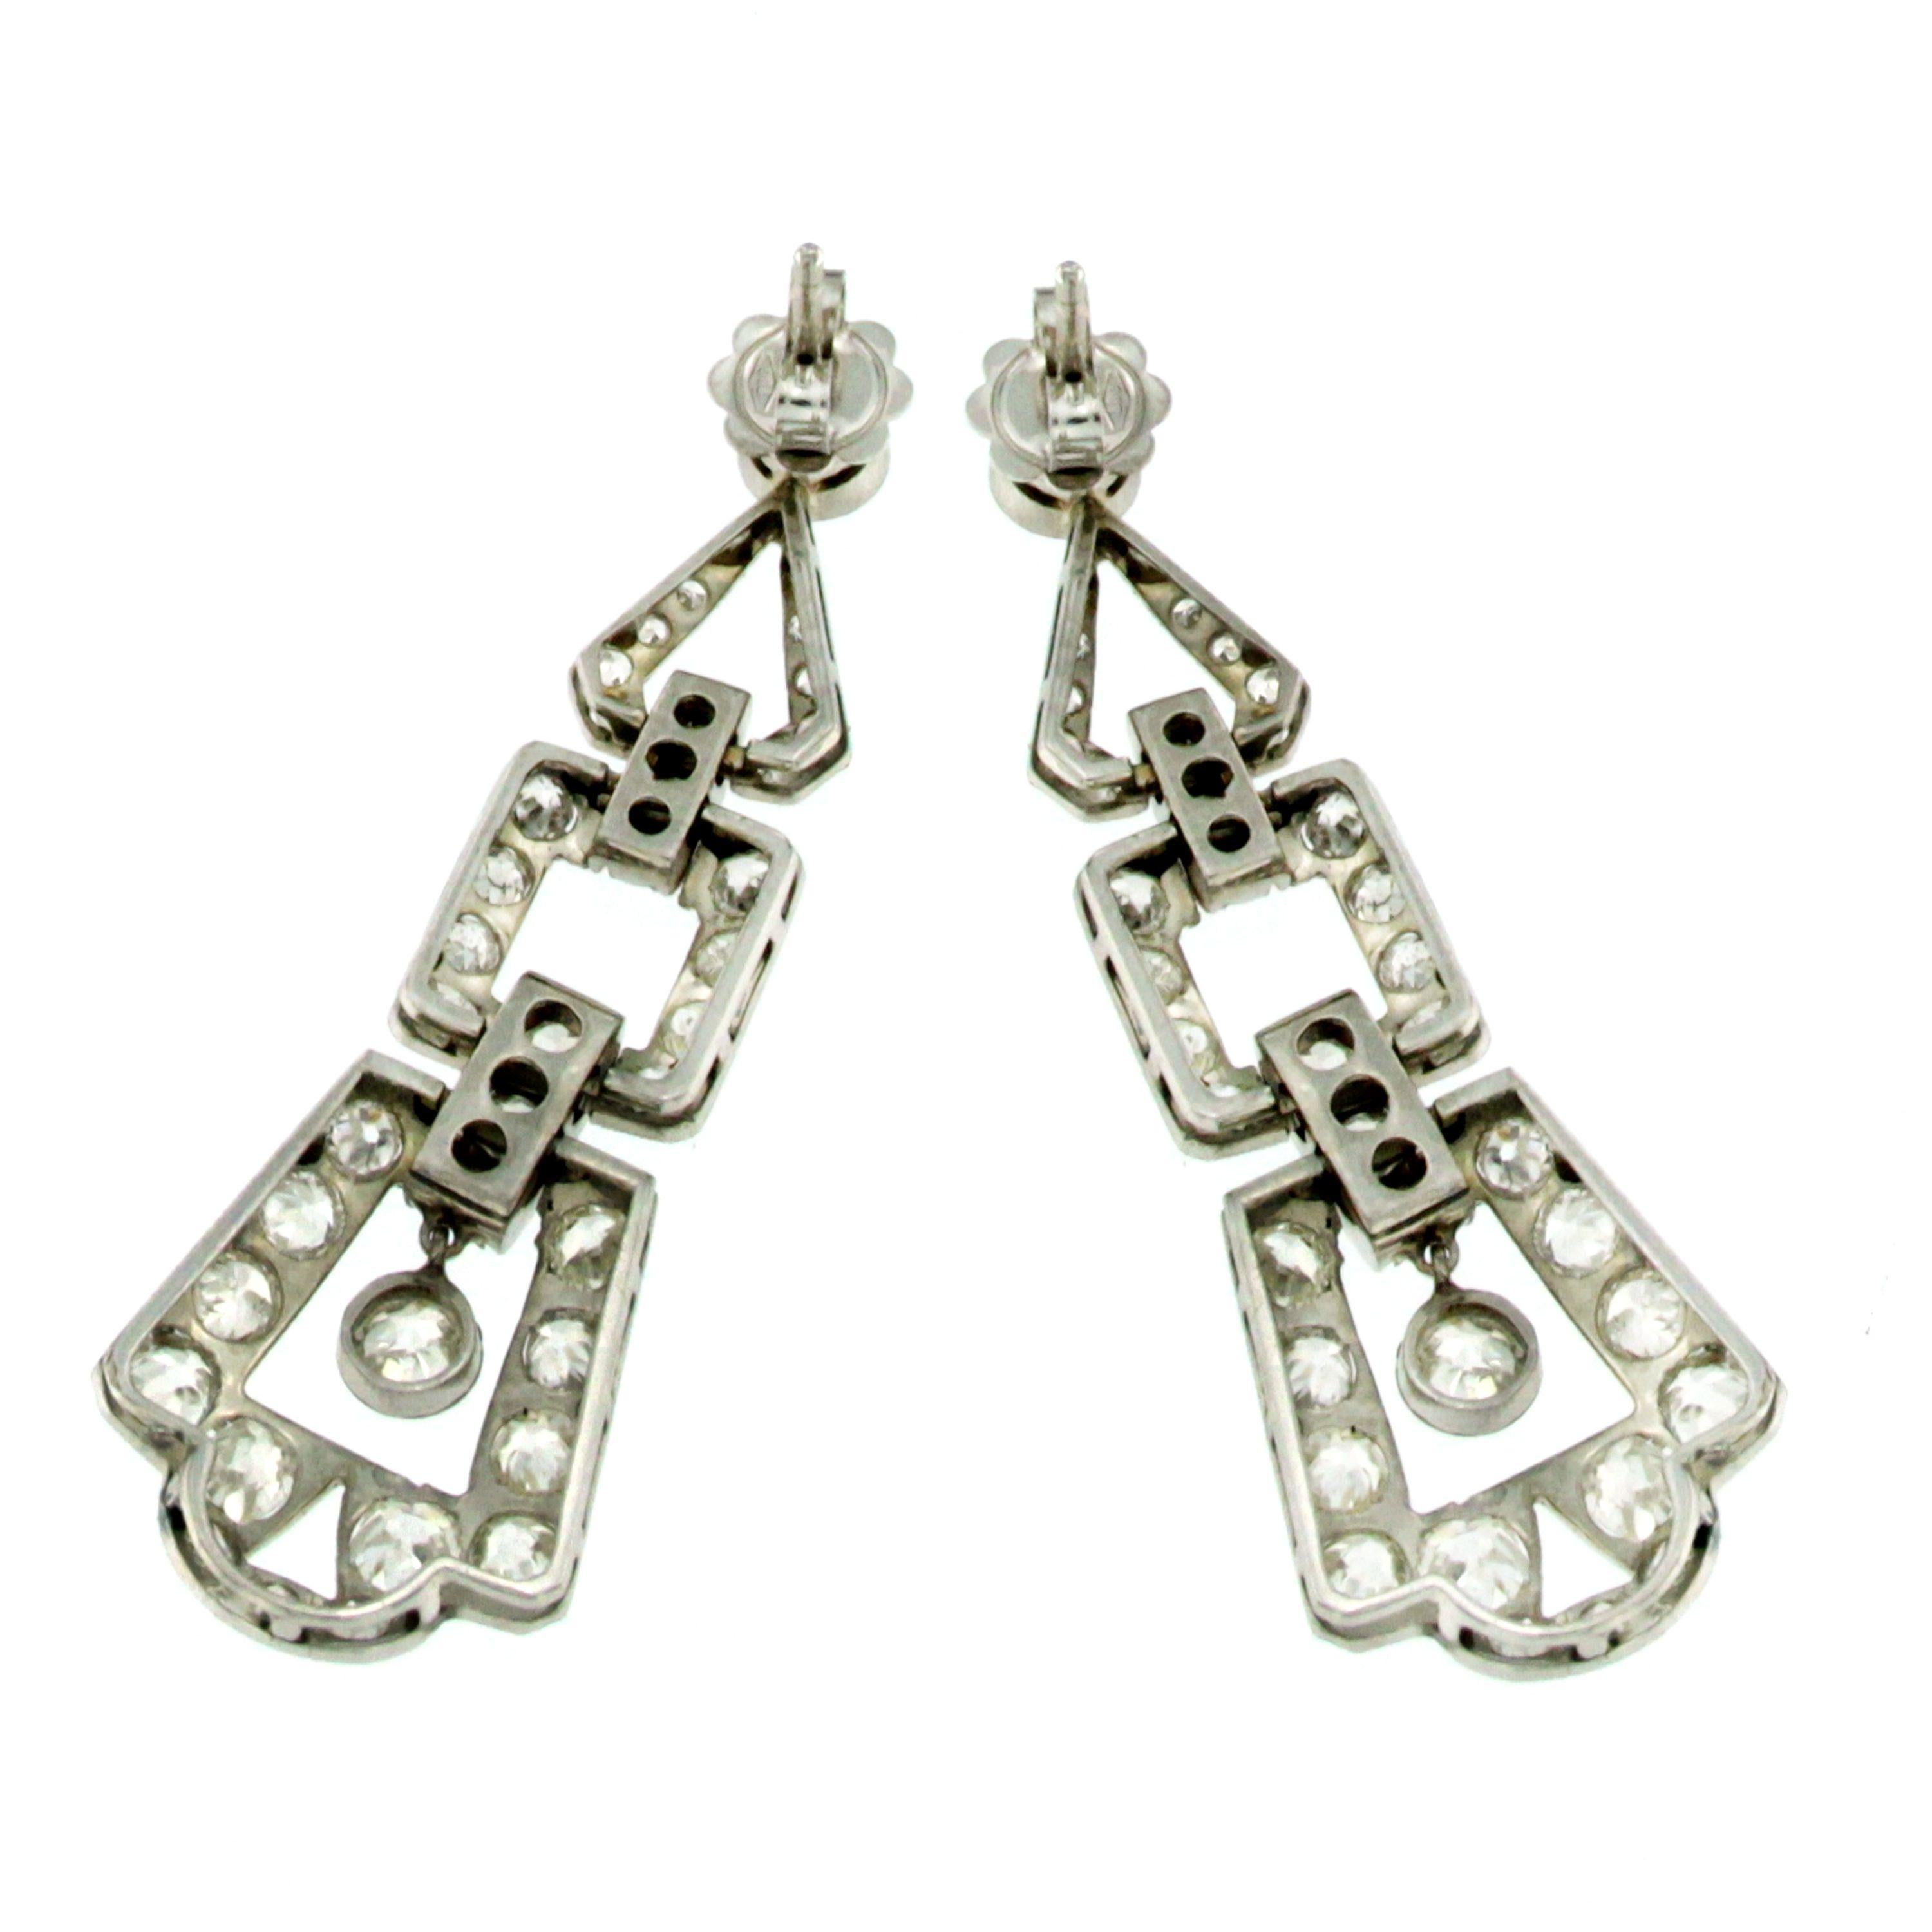 Stunning genuine Art Deco earrings, set with Sparkling Old Mine Cut Diamonds, weighing total 6.50 carats and graded H/I/J color Vs clarity

Authentic from 1930' , origin Europe, these earrings are distinguished by the classic design of that